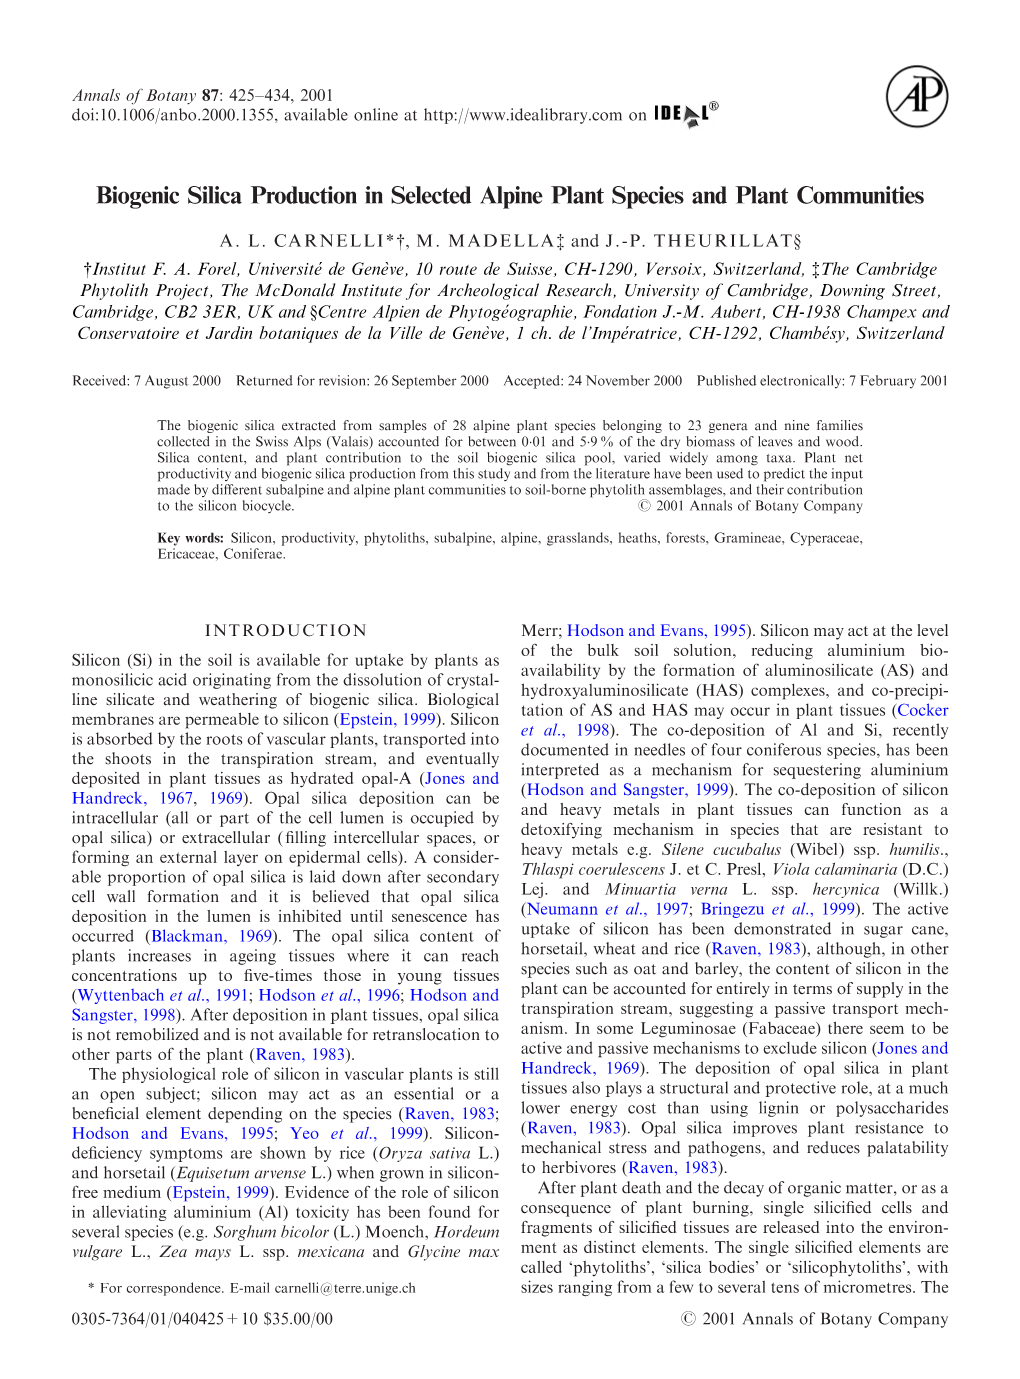 Biogenic Silica Production in Selected Alpine Plant Species and Plant Communities